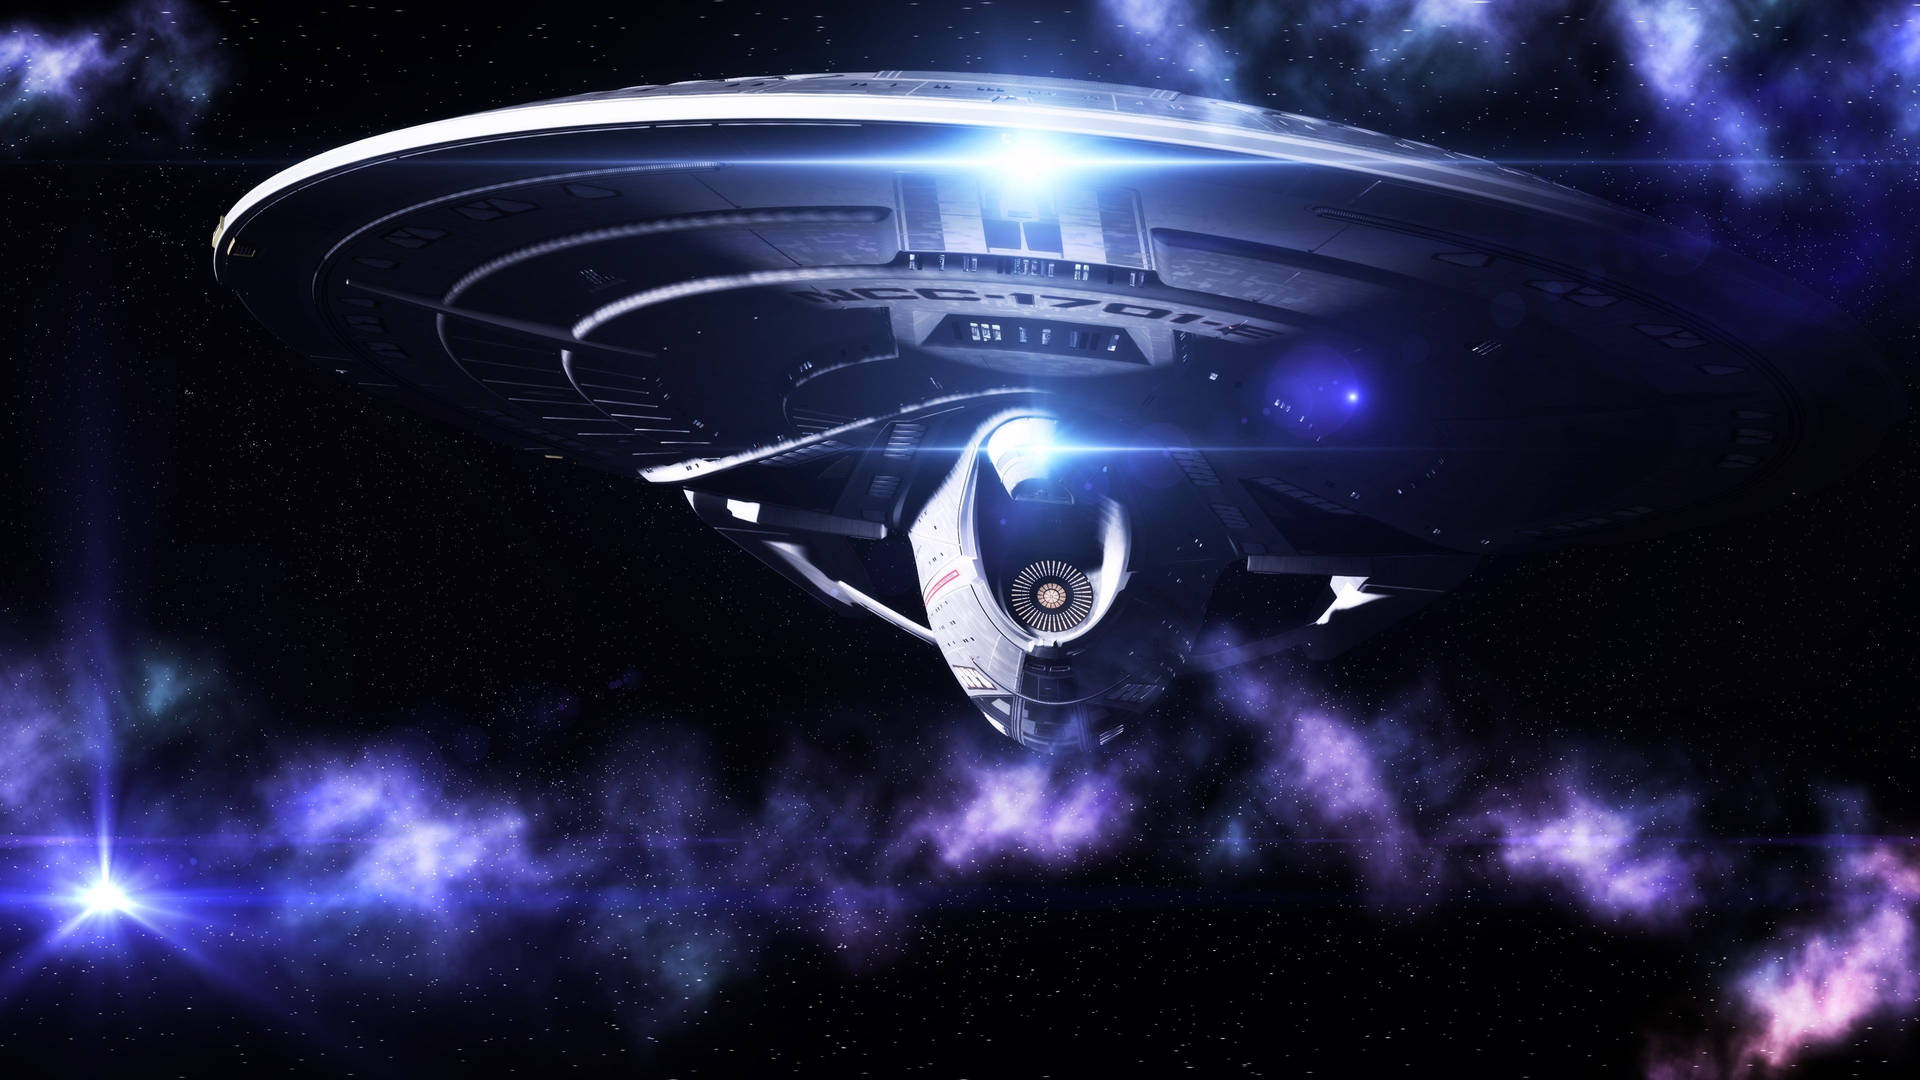 Explore the Final Frontier with a Starship Wallpaper